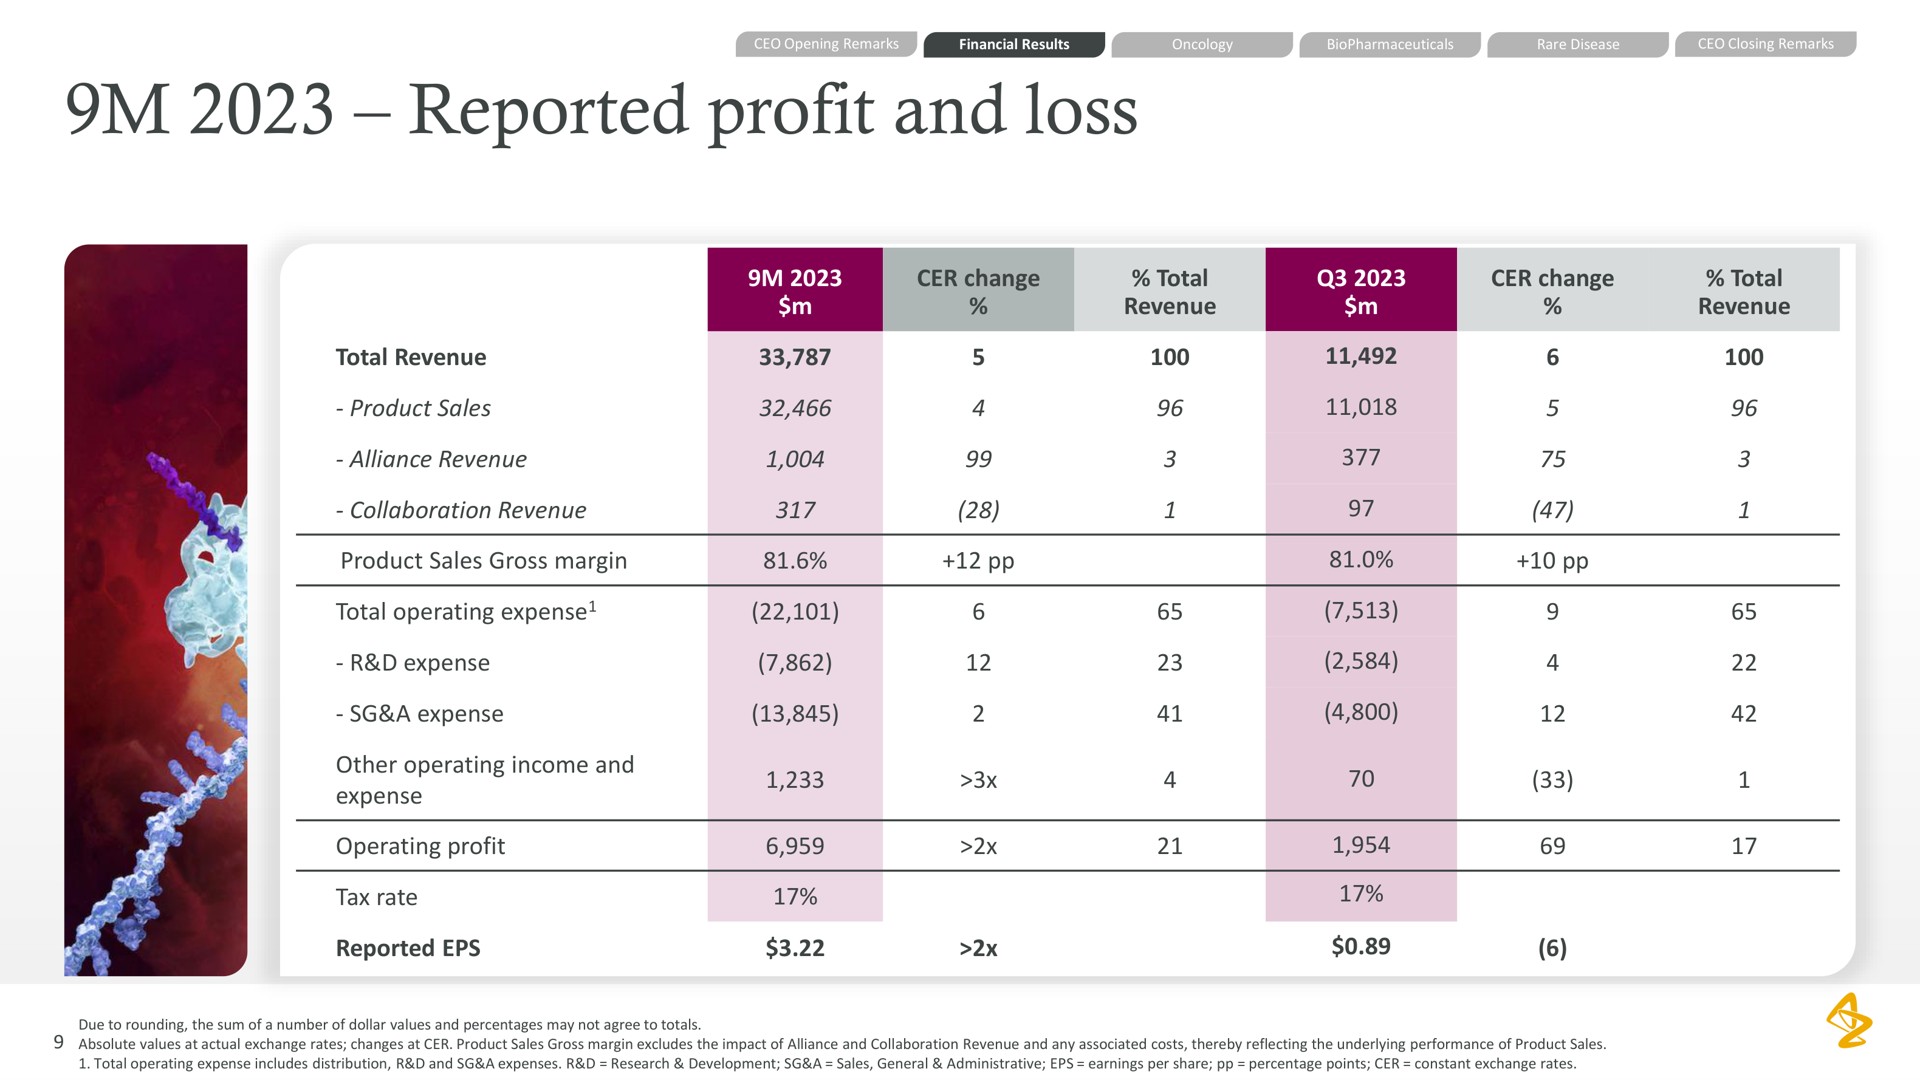 reported profit and loss | AstraZeneca